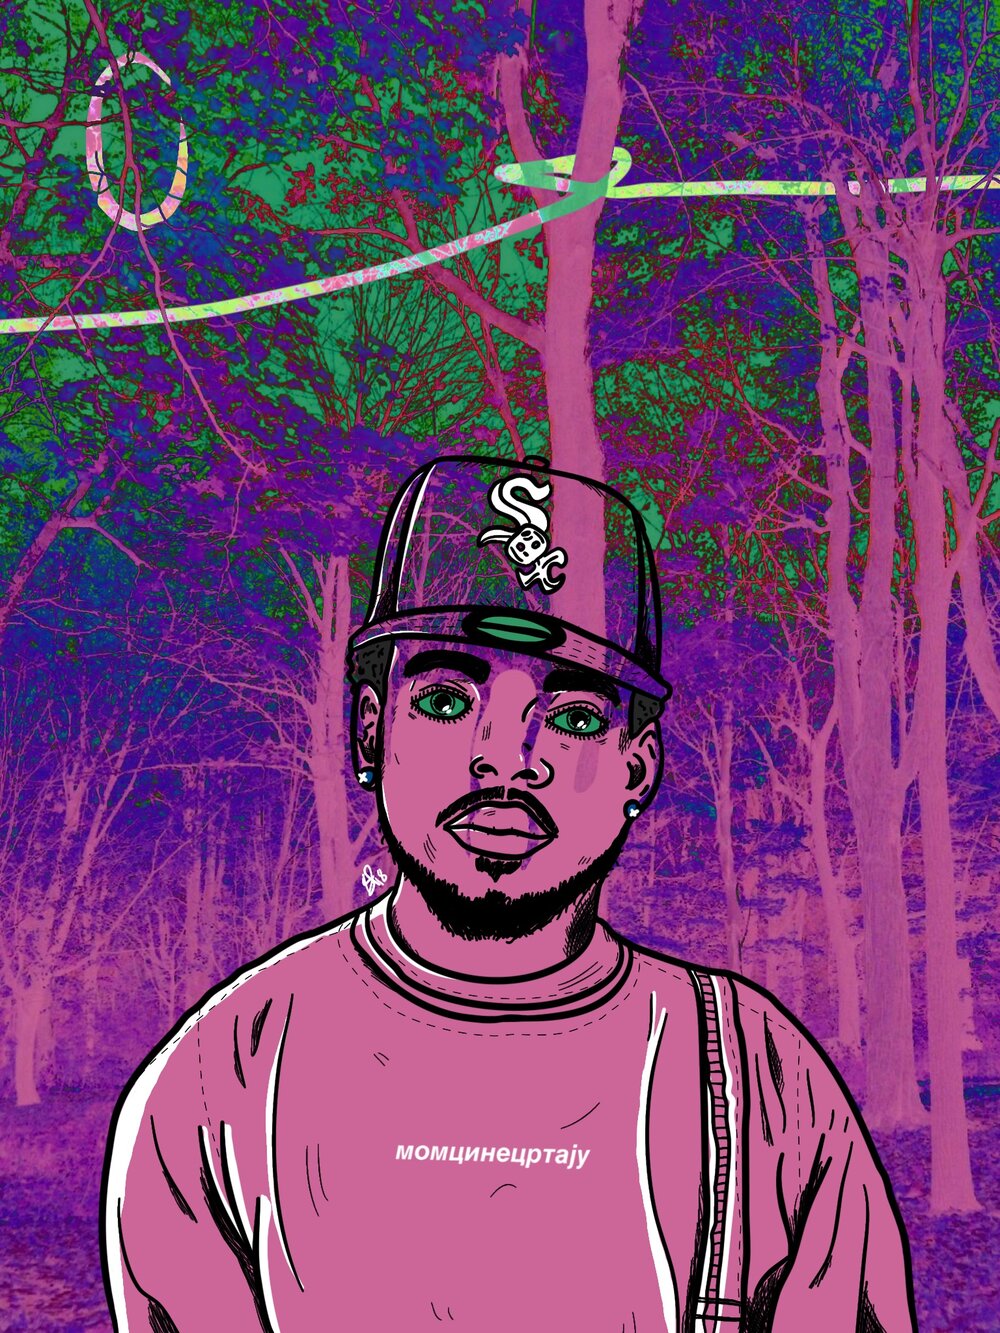 CHANCE THE RAPPER - BACKWOODS - Limited Print by BOYSDONTDRAW